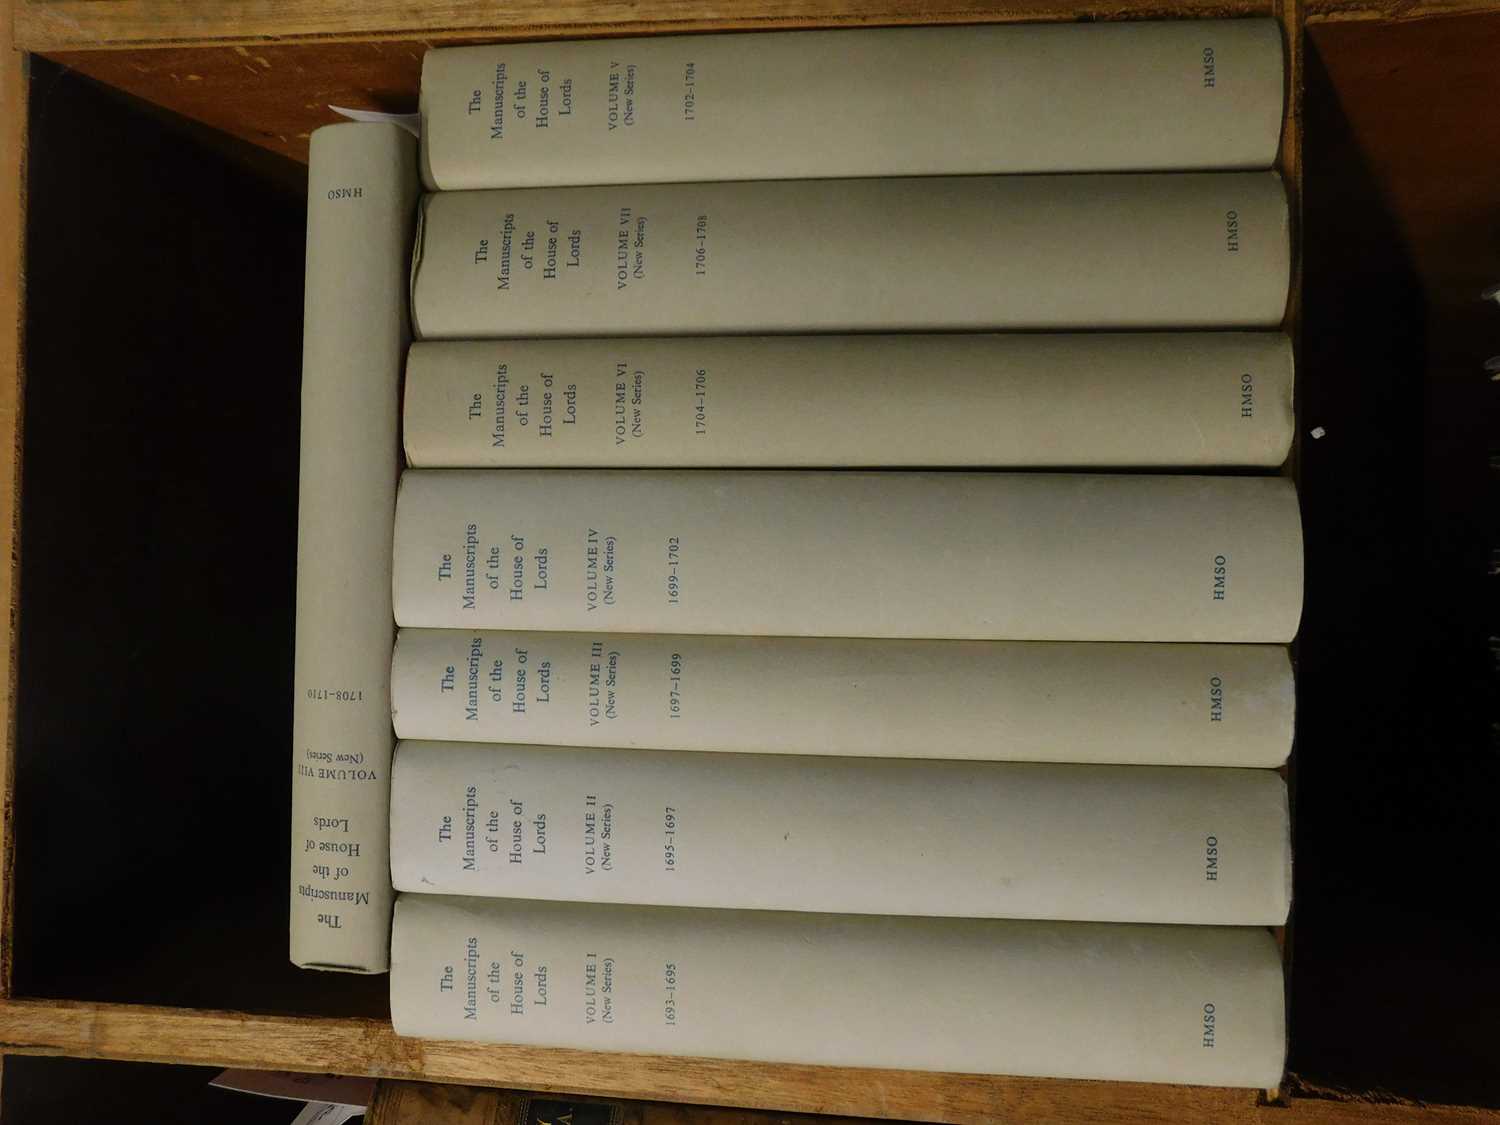 THE MANUSCRIPTS OF THE HOUSE OF LORDS: London, HMSO 1964-66, 8 vols, new series, original cloth, d/w - Image 2 of 2